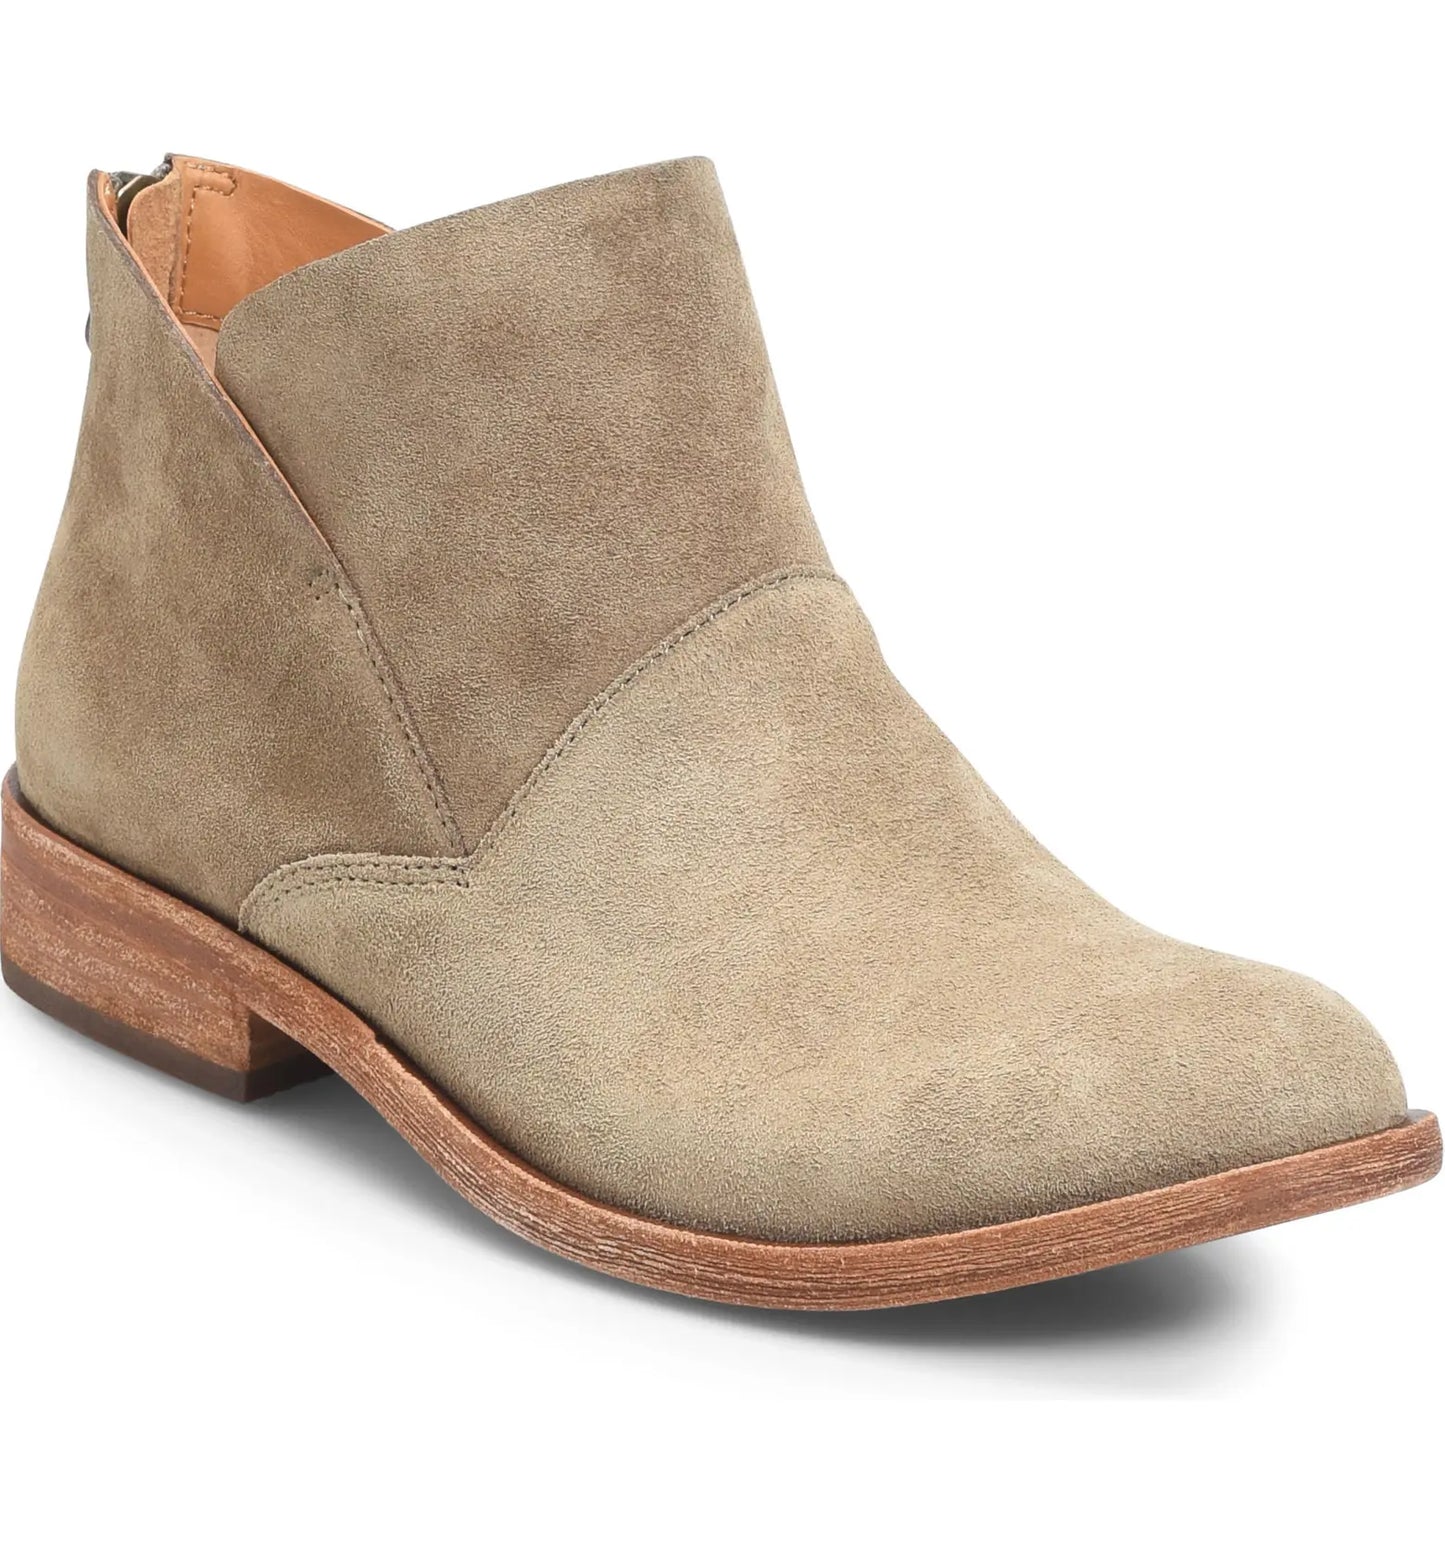 Kork-Ease Ryder Ankle Boot - Taupe/Marmotta Suede